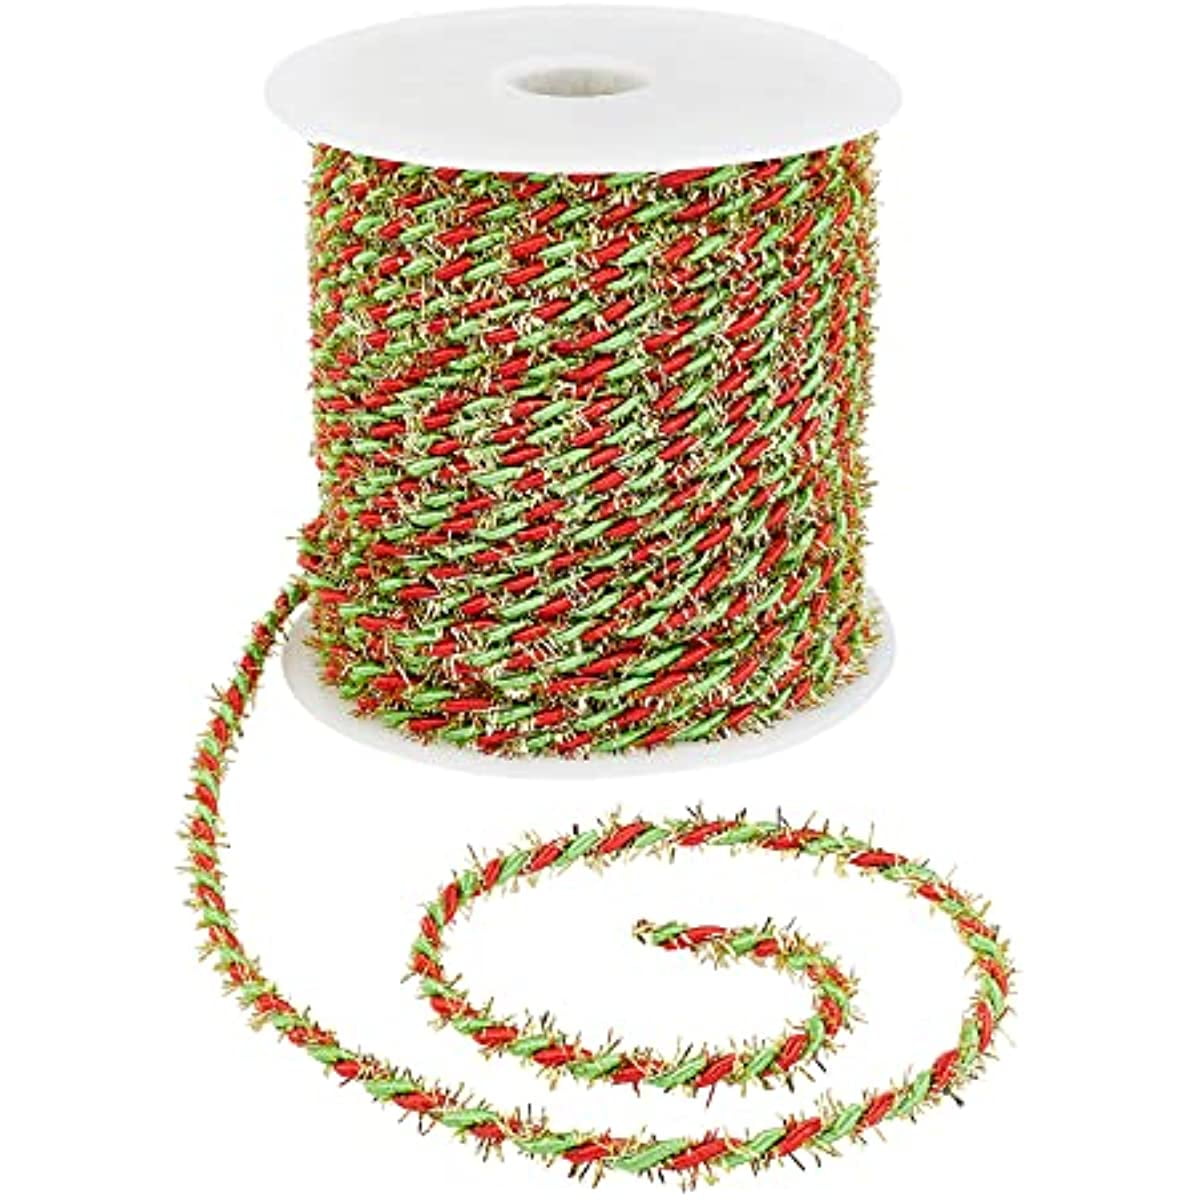 Decoration string 1,5mm red/white 25m